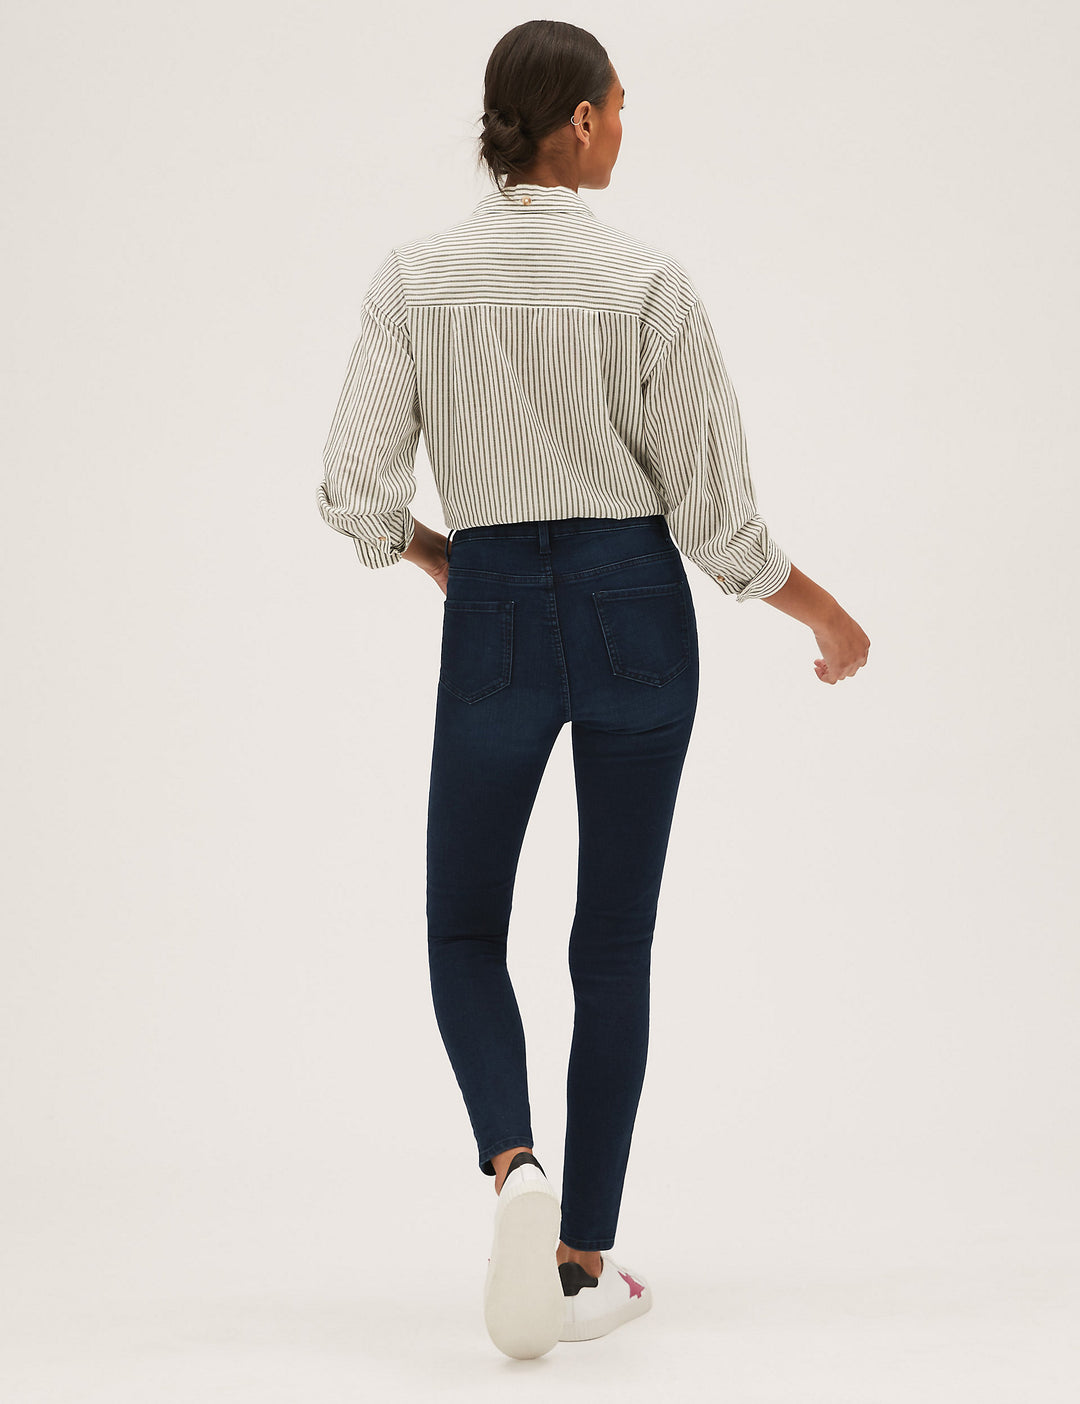 M&S The Ivy Skinny Jeans T57/7561